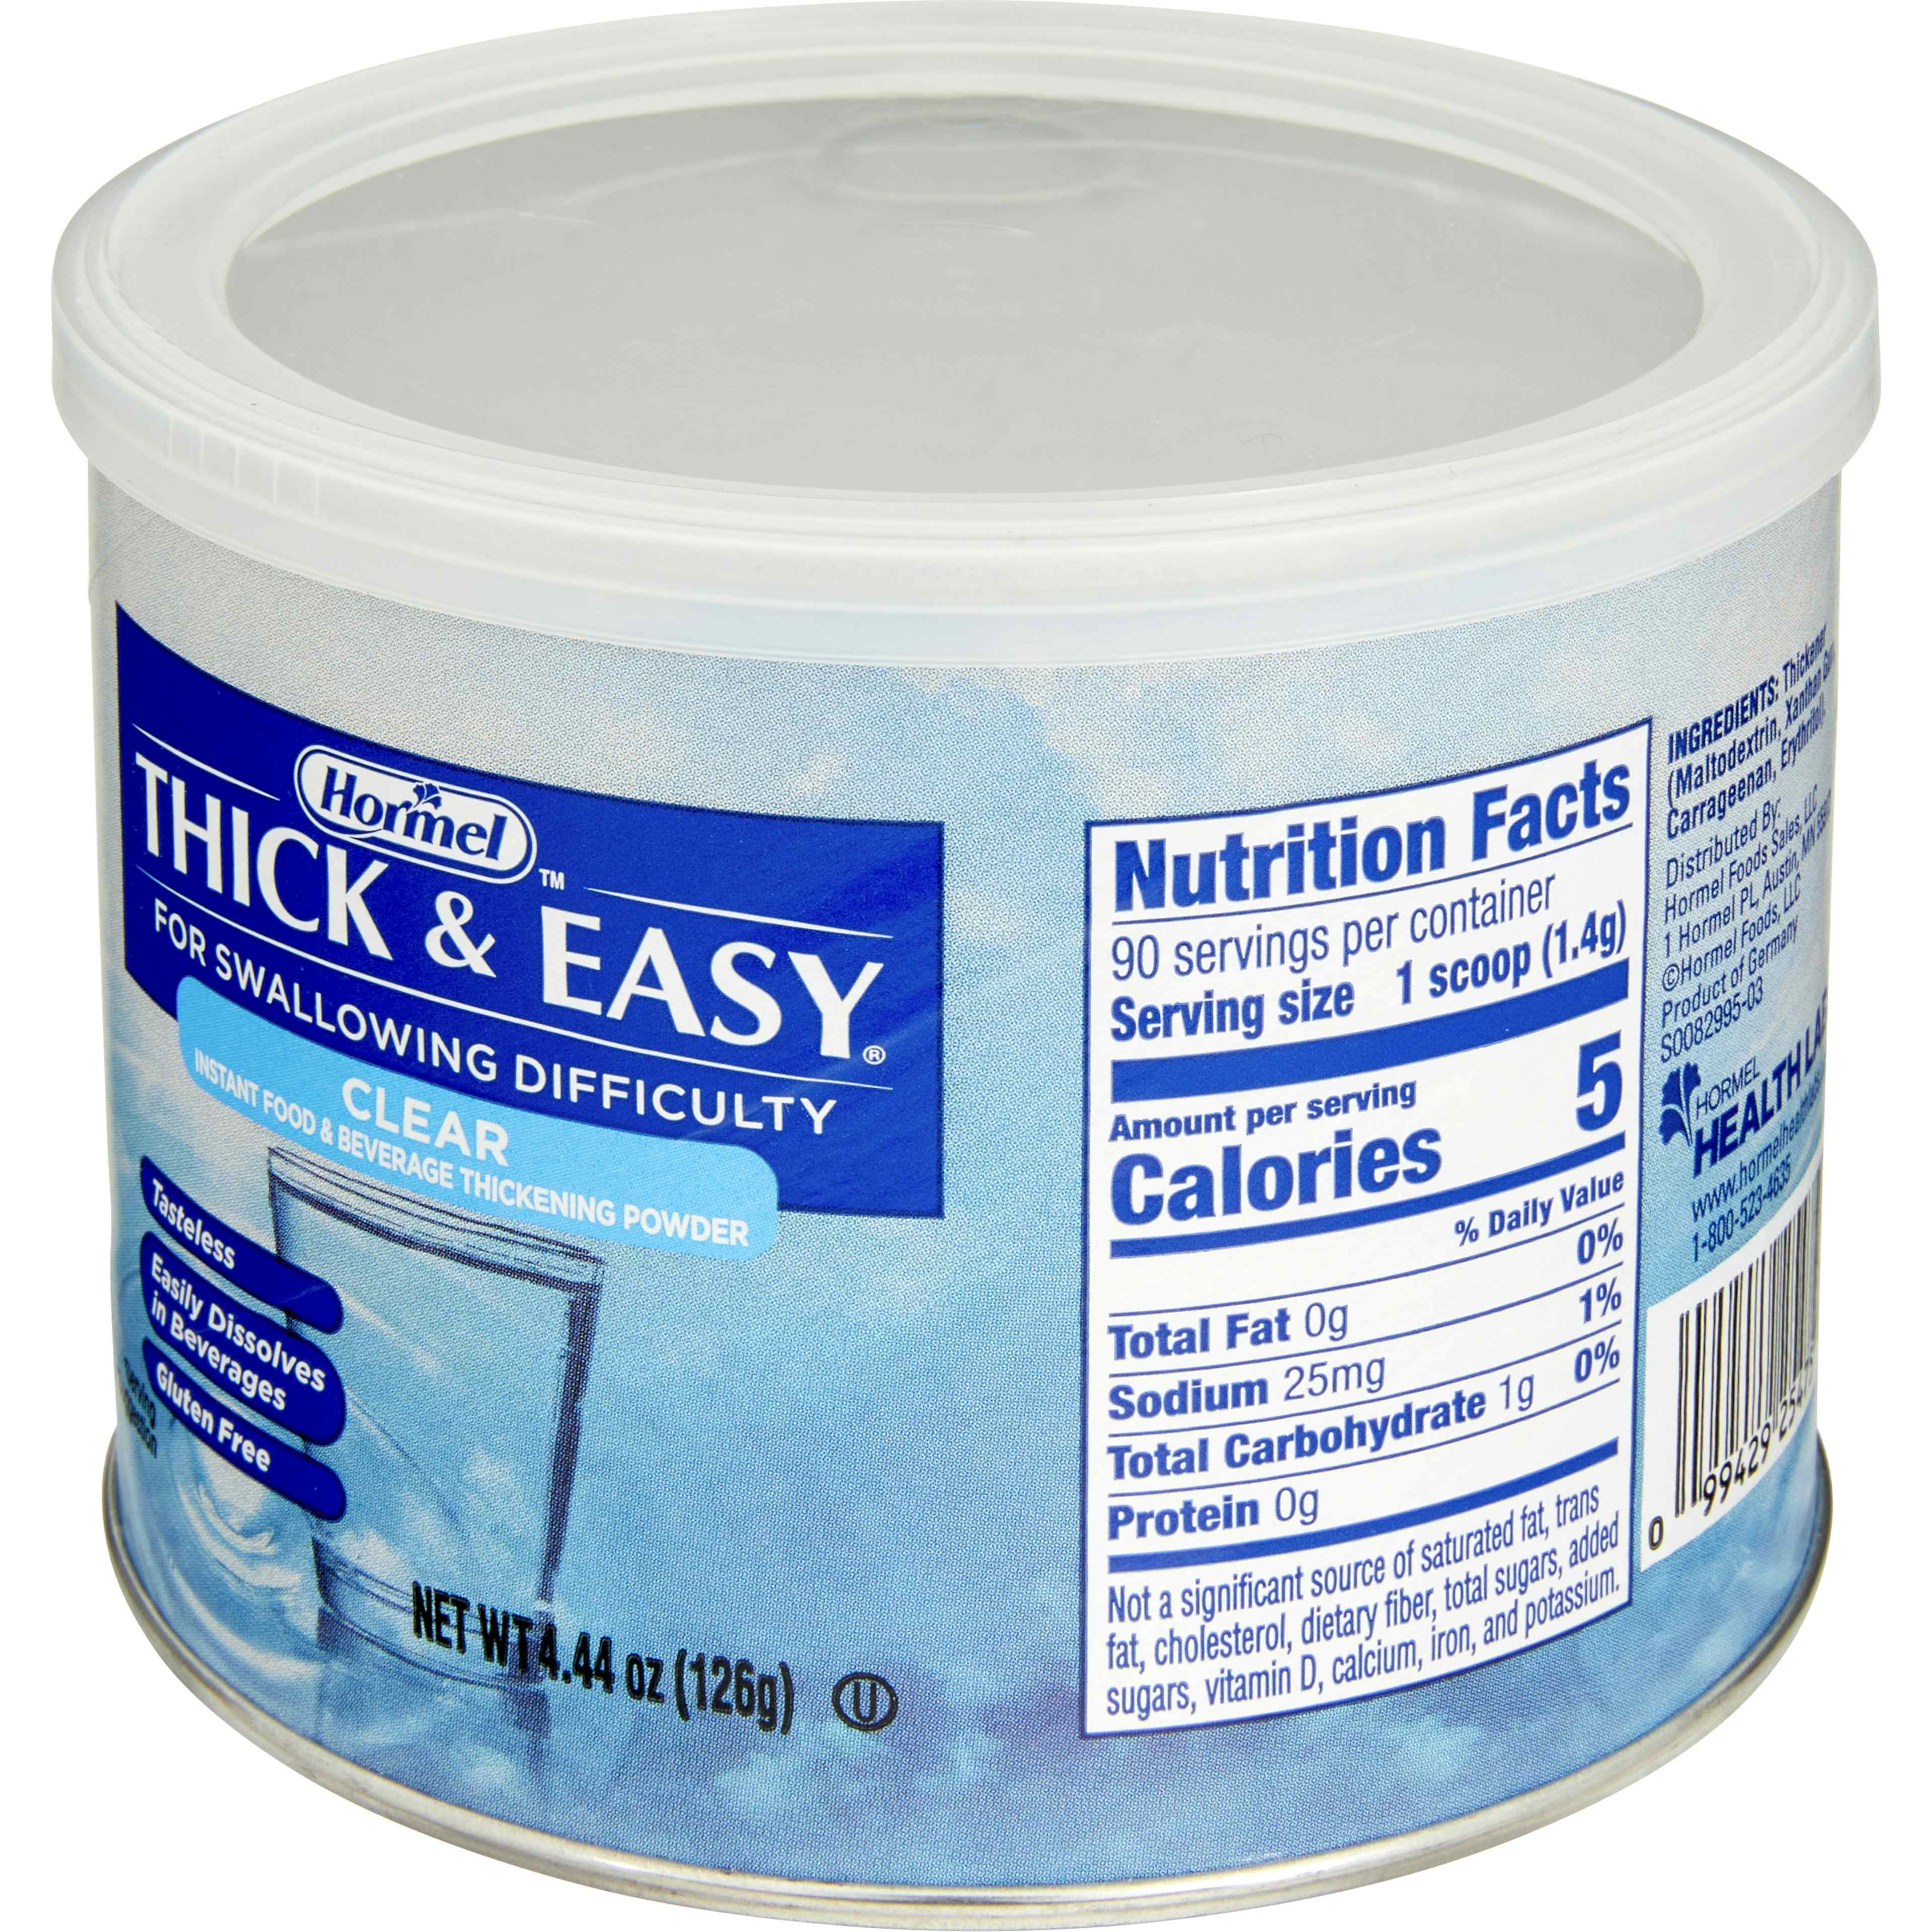 Thick & Easy Clear Food and Beverage Thickener, 4.4 oz. Canister